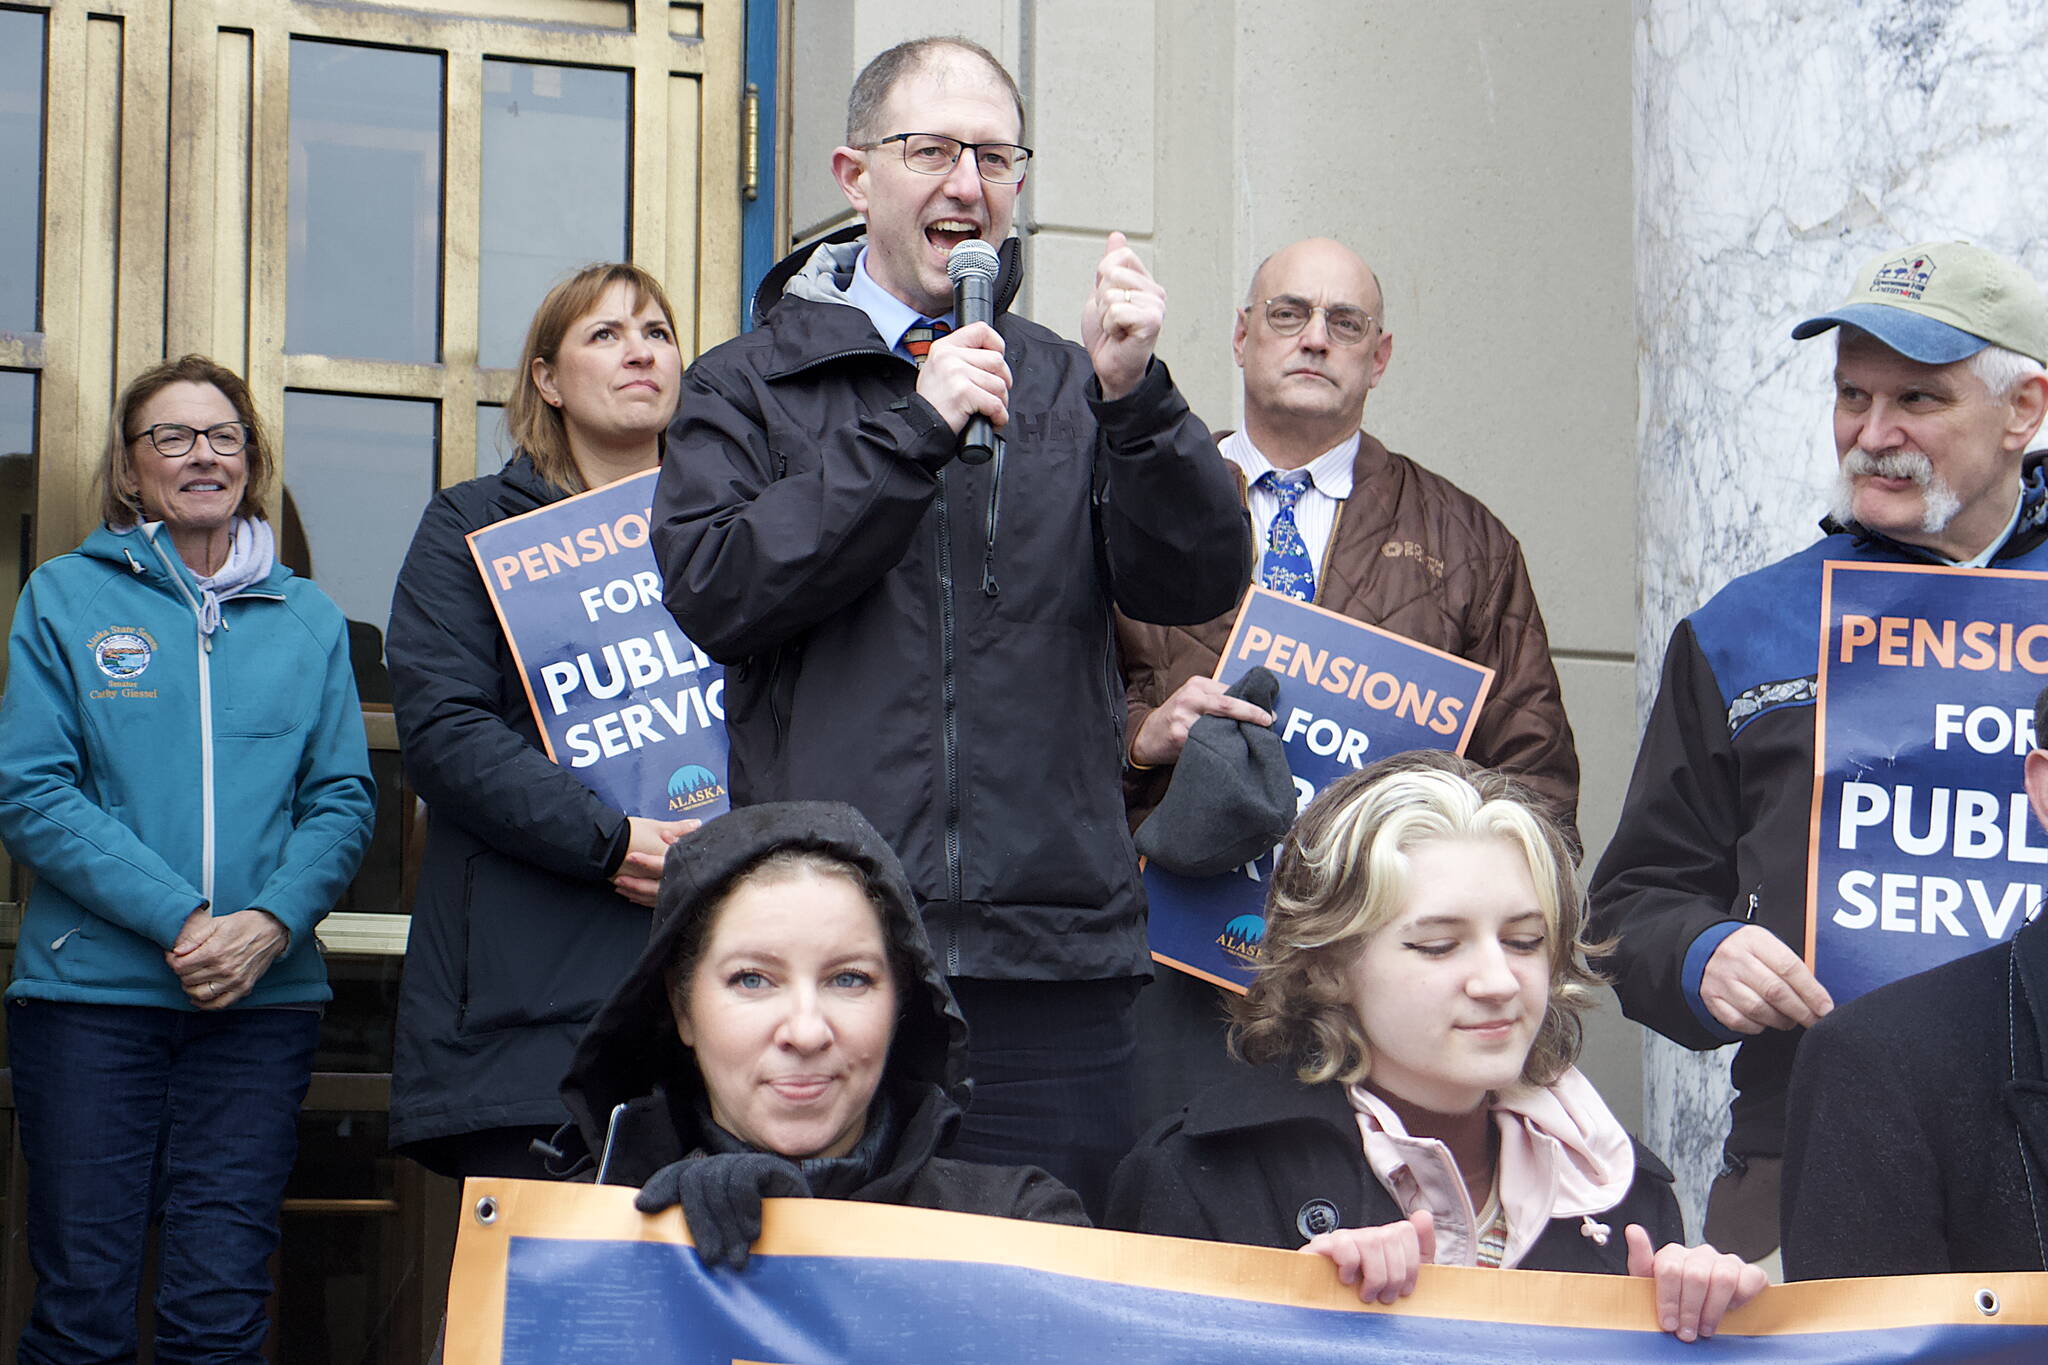 State Sen. Jesse Kiehl, D-Juneau, vows a bill boosting state employees pensions will pass “the 33rd Alaska Legislature” during a rally by about 70 union supporters on the steps of the Alaska State Capitol on Tuesday. Kiehl is a member of the Senate Finance Committee, which spent much of Tuesday hearing testimony about a pension bill, but Senate and union leaders acknowledge the proposal will likely have to wait until next year before it has a realistic chance of making it through the full Legislature. (Mark Sabbatini / Juneau Empire)